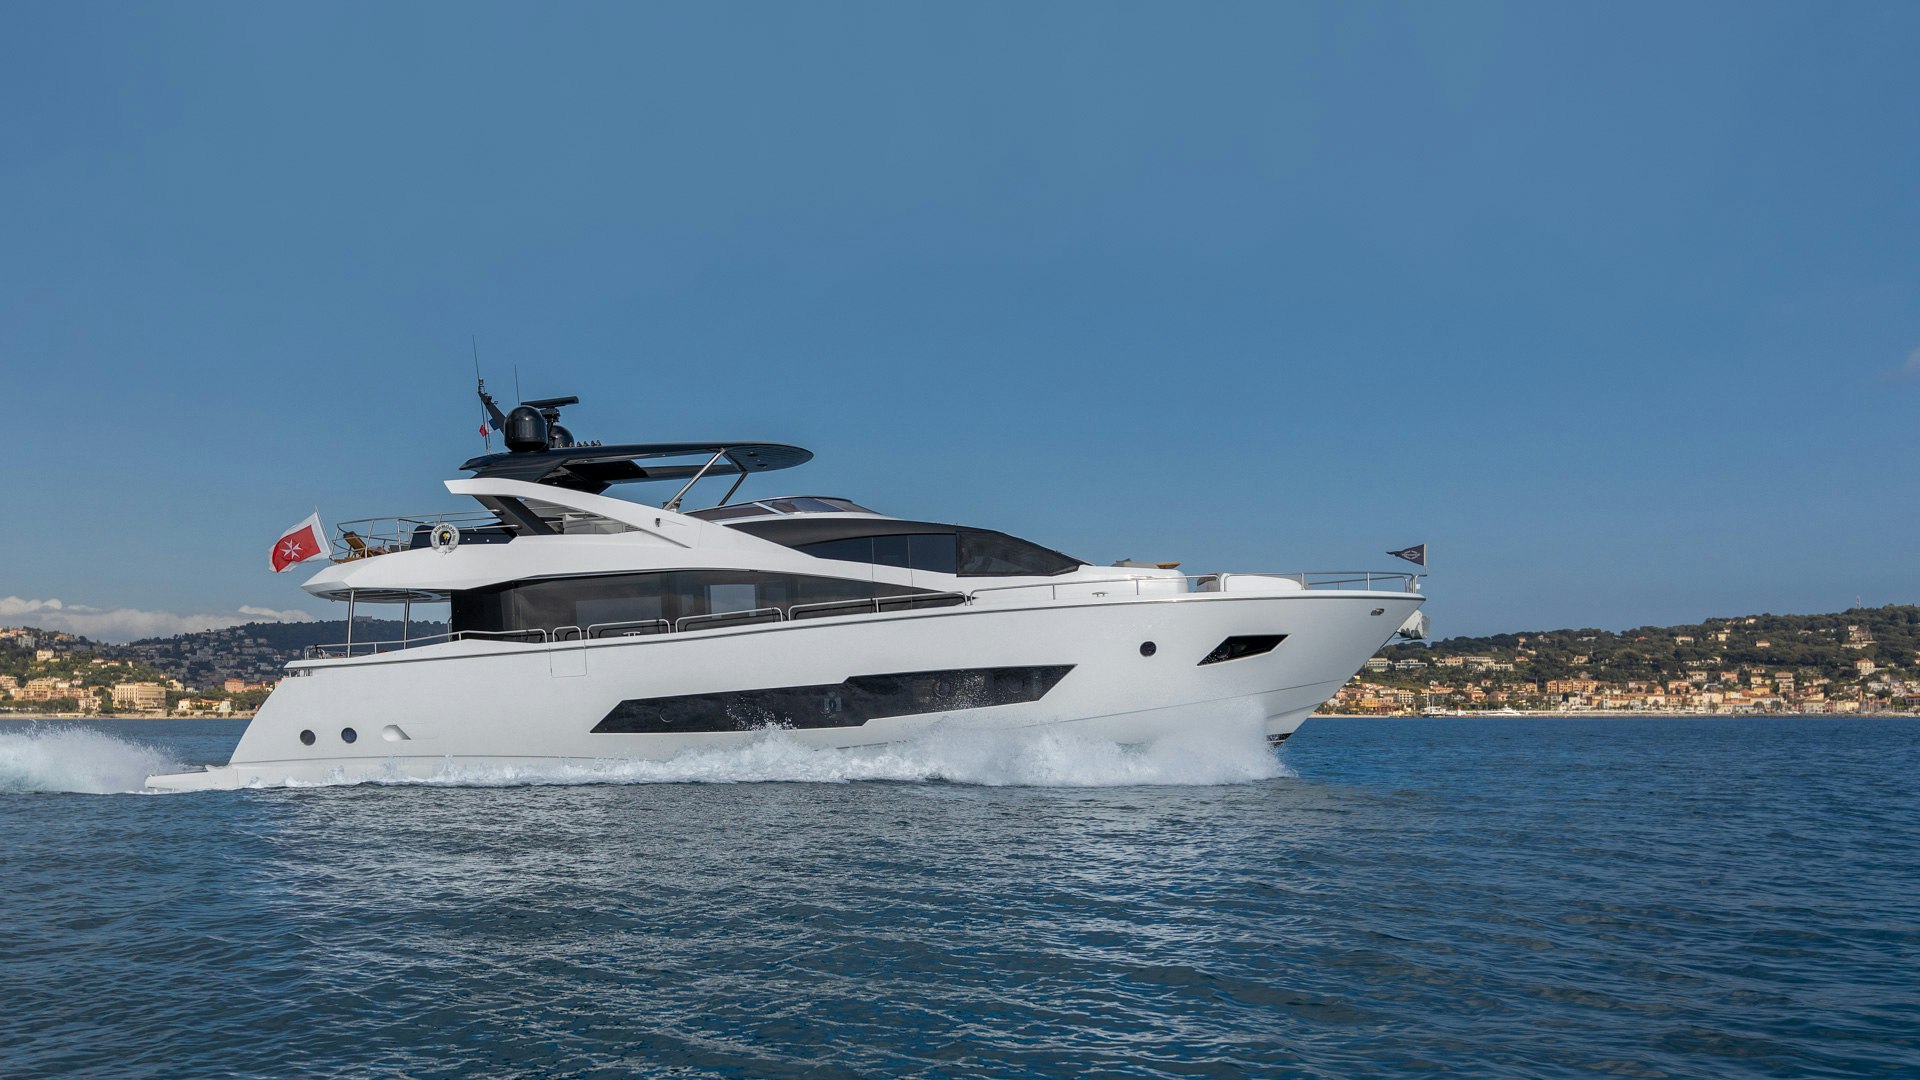 Seasonal Rates for INSOMNIA Private Luxury Yacht For Charter